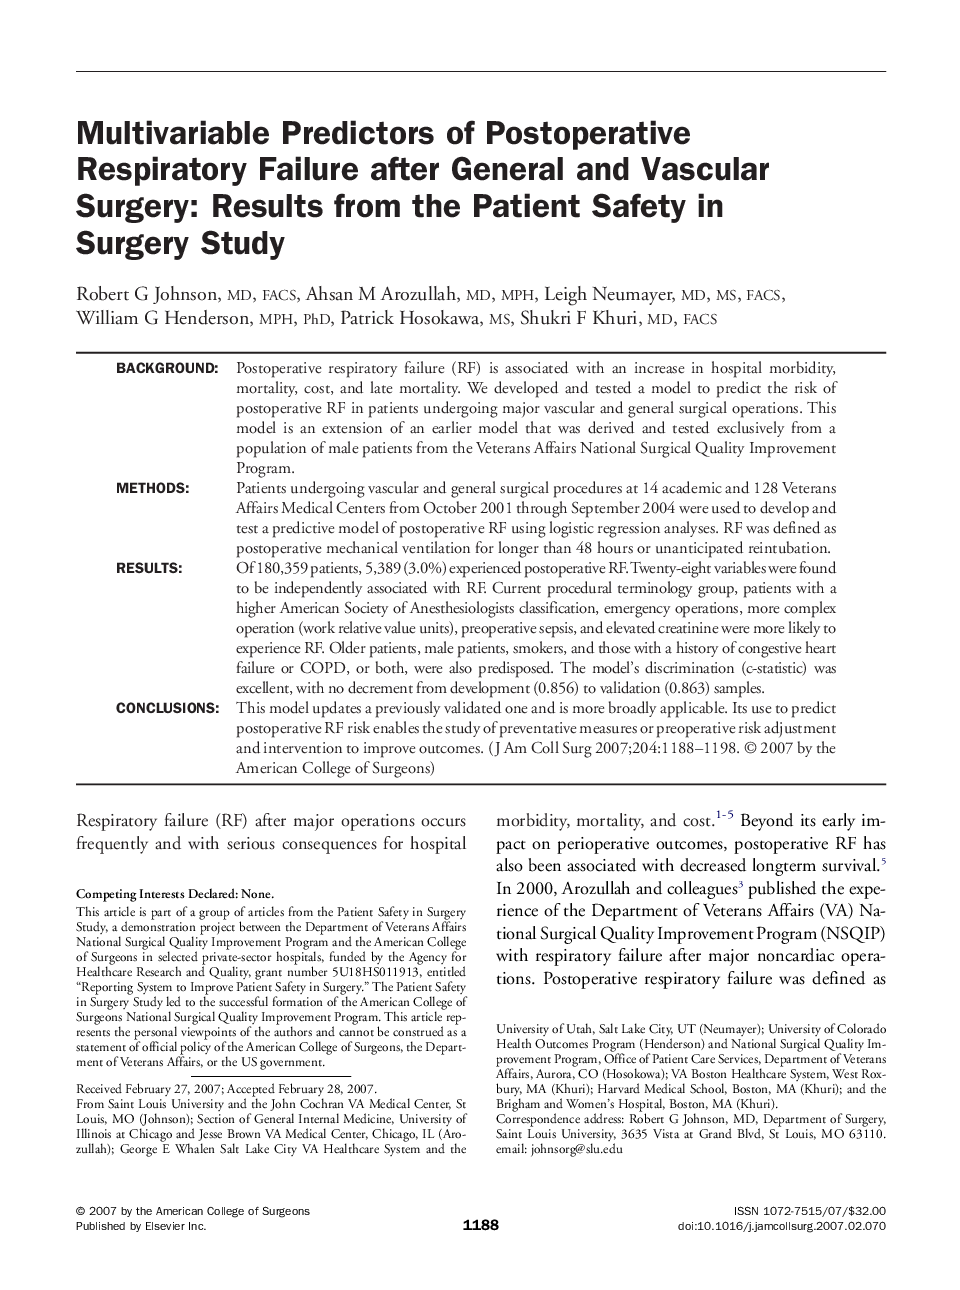 Multivariable Predictors of Postoperative Respiratory Failure after General and Vascular Surgery: Results from the Patient Safety in Surgery Study 